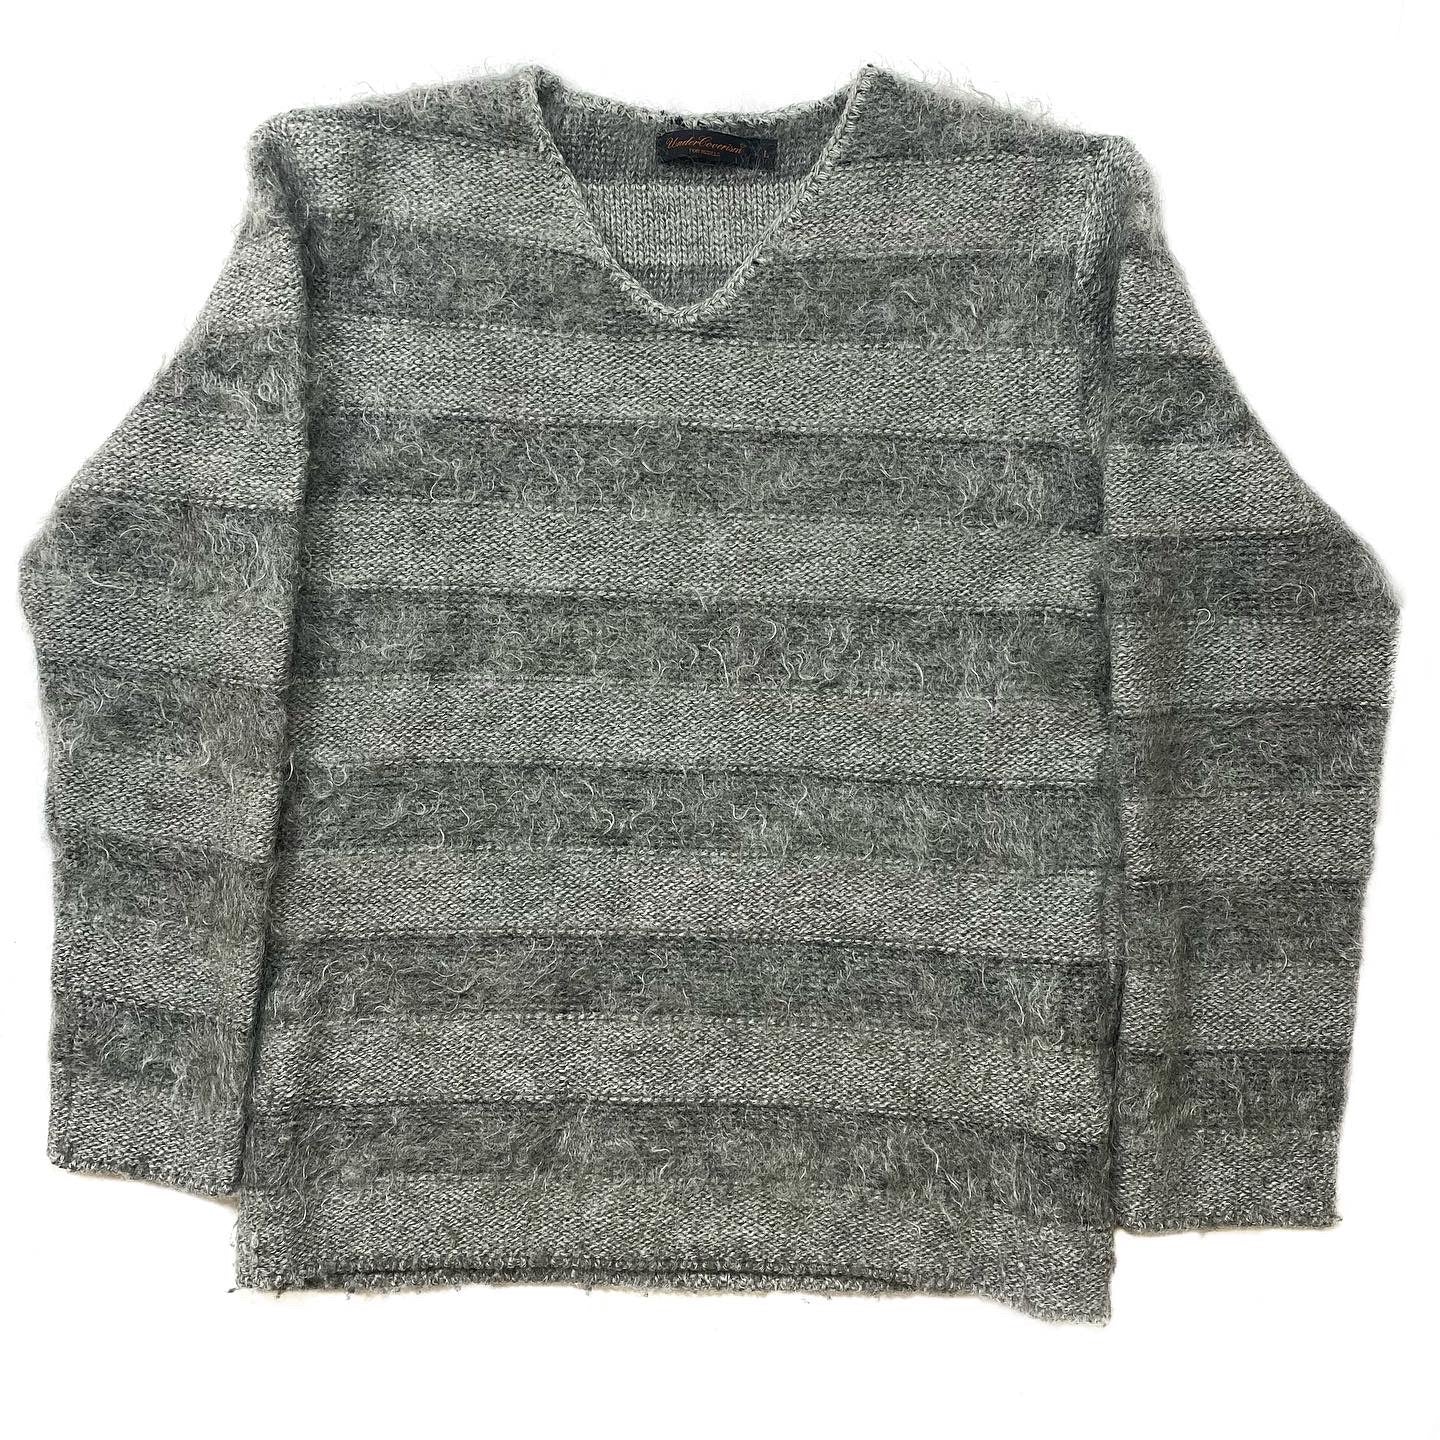 Undercover Striped Mohair Sweater A/W03 “Paperdoll” Large